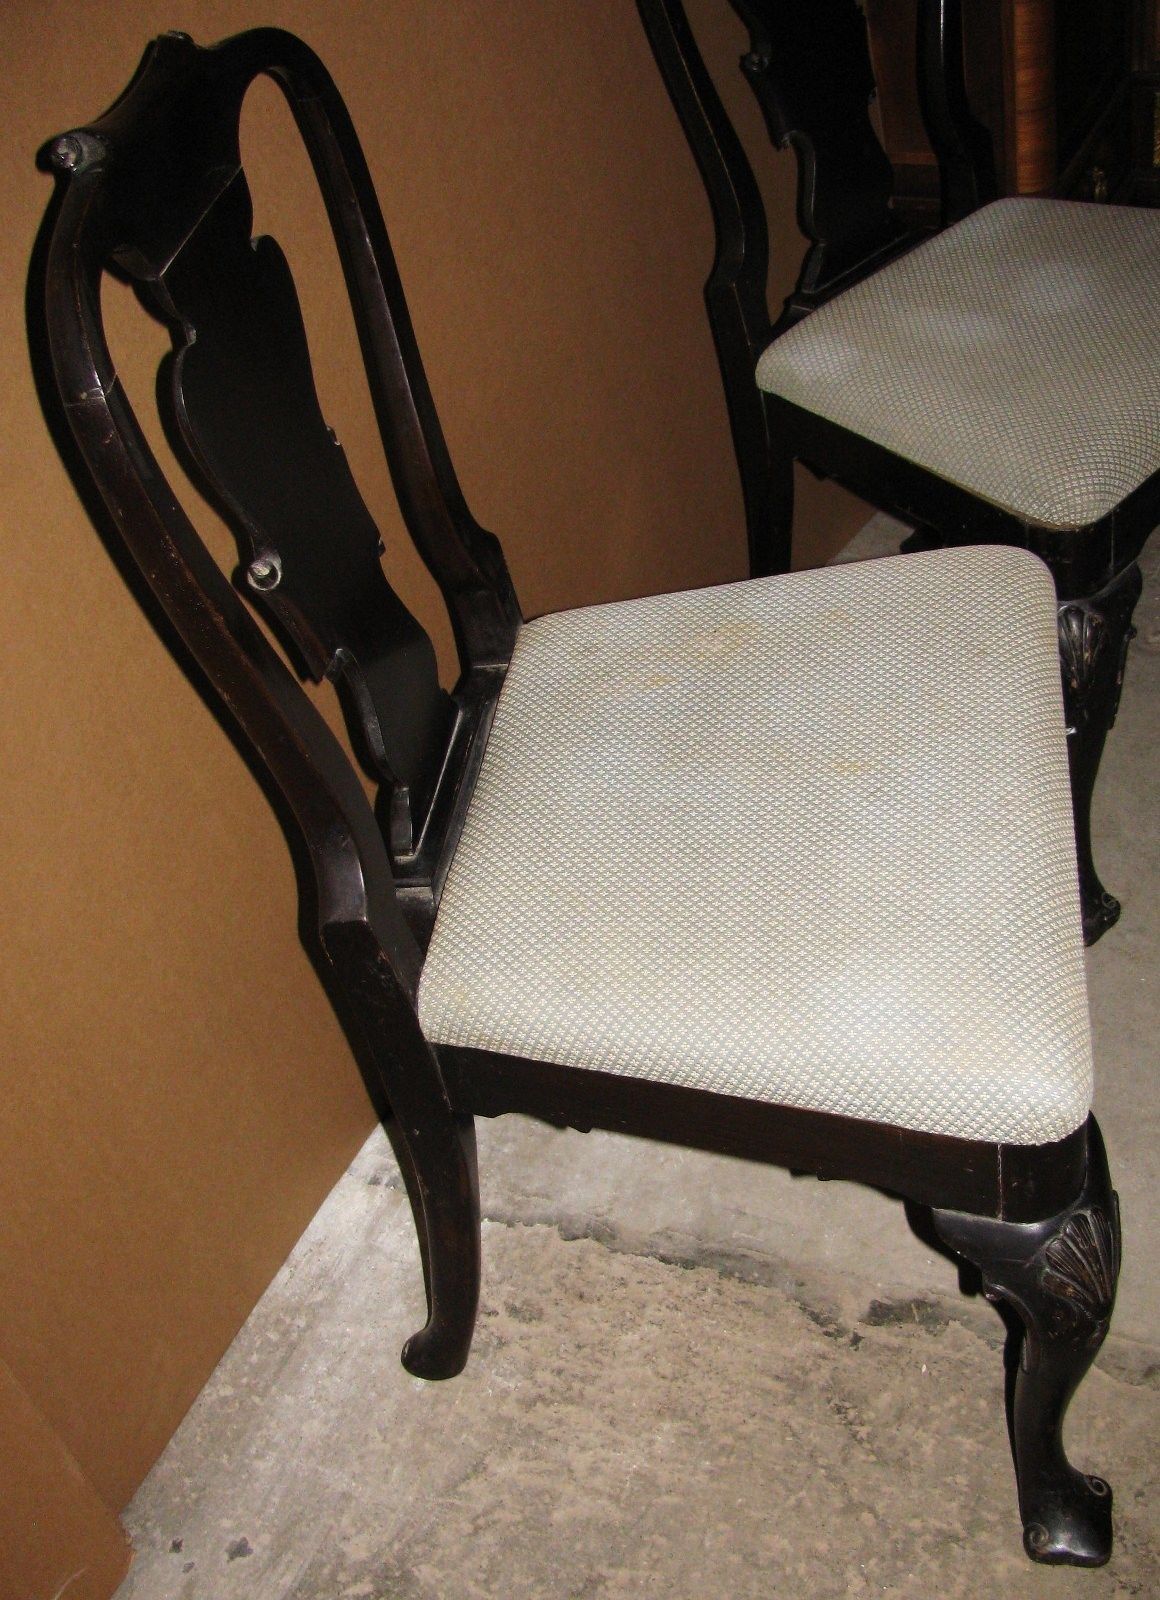 LATE 19TH CENTURY PAIR OF EBONIZED & CARVED QUEEN ANNE SPANISH FOOT SIDE CHAIRS